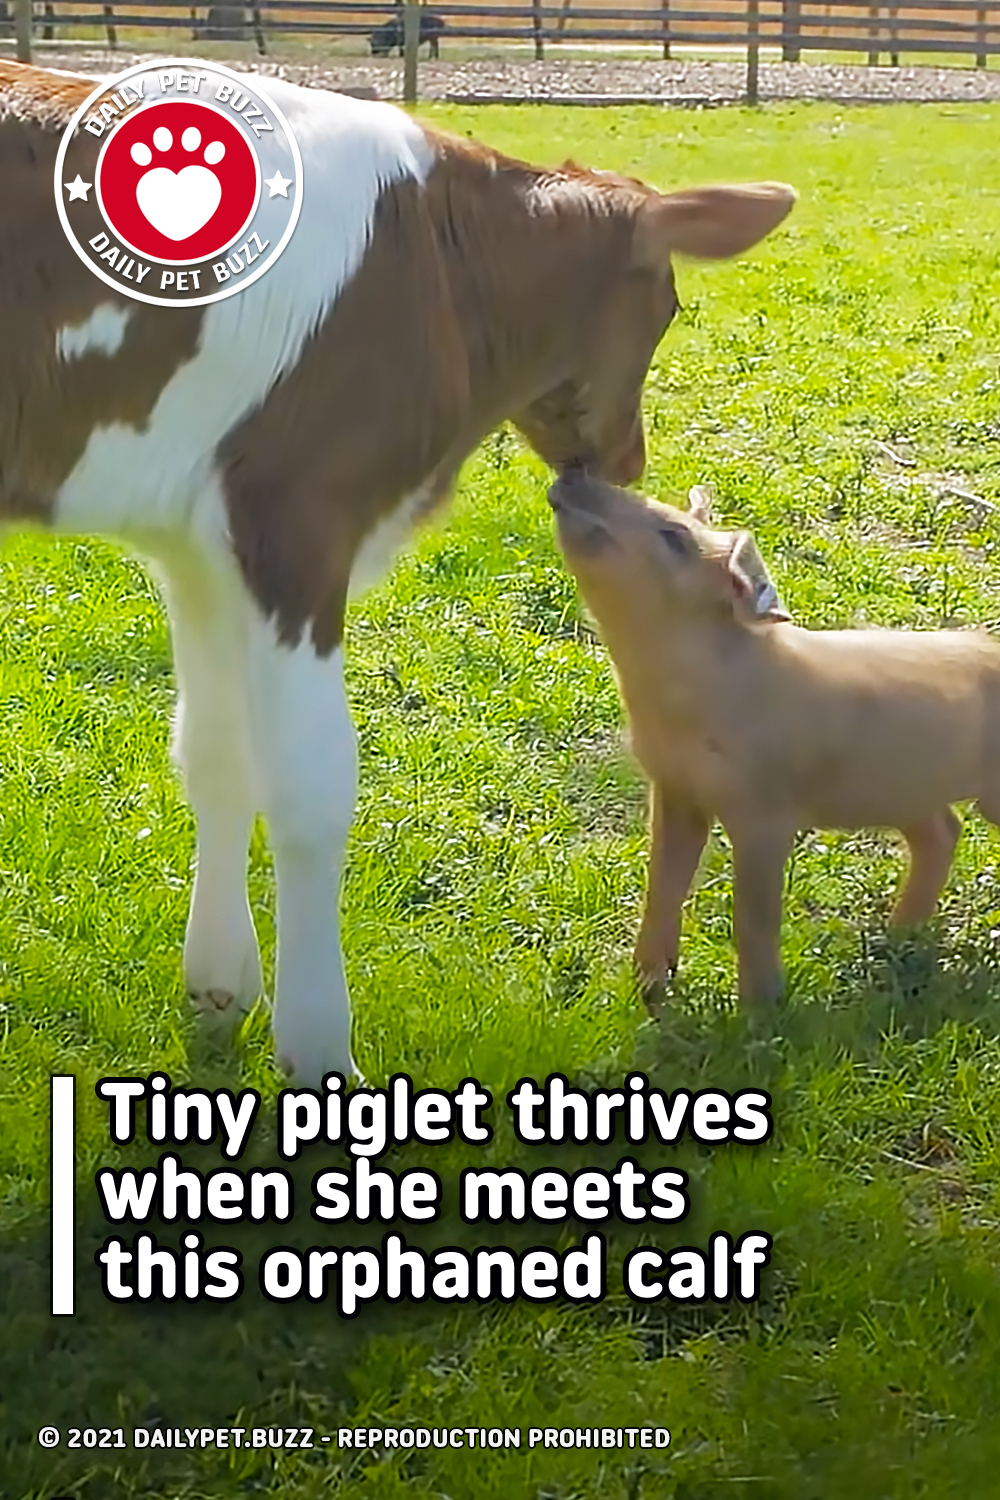 Tiny piglet thrives when she meets this orphaned calf